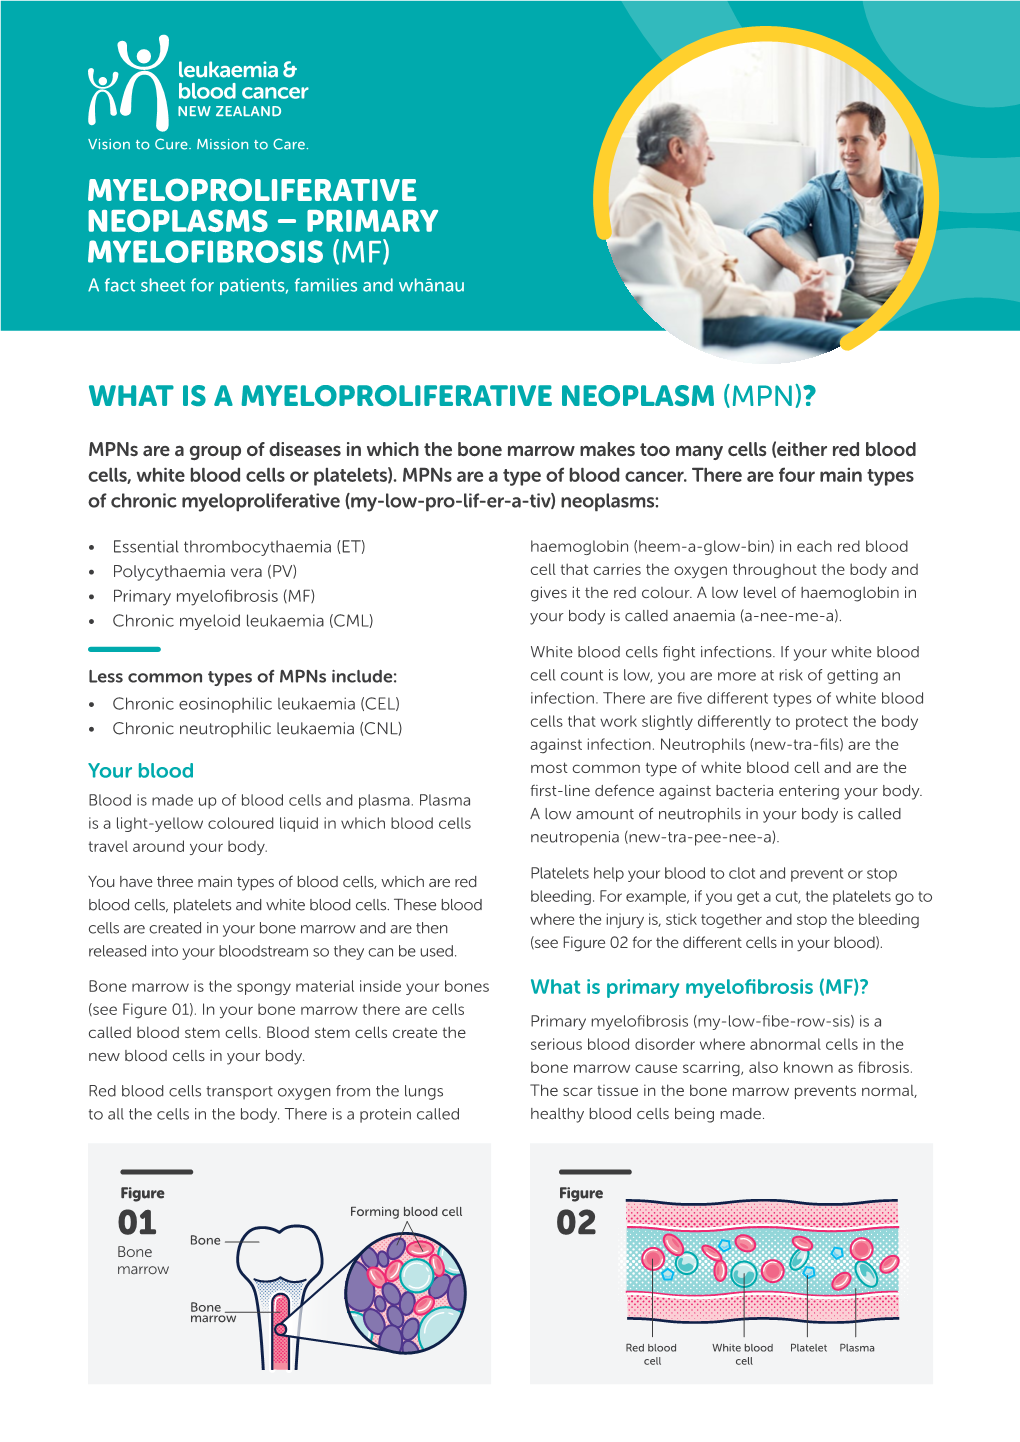 PRIMARY MYELOFIBROSIS (MF) a Fact Sheet for Patients, Families and Whānau